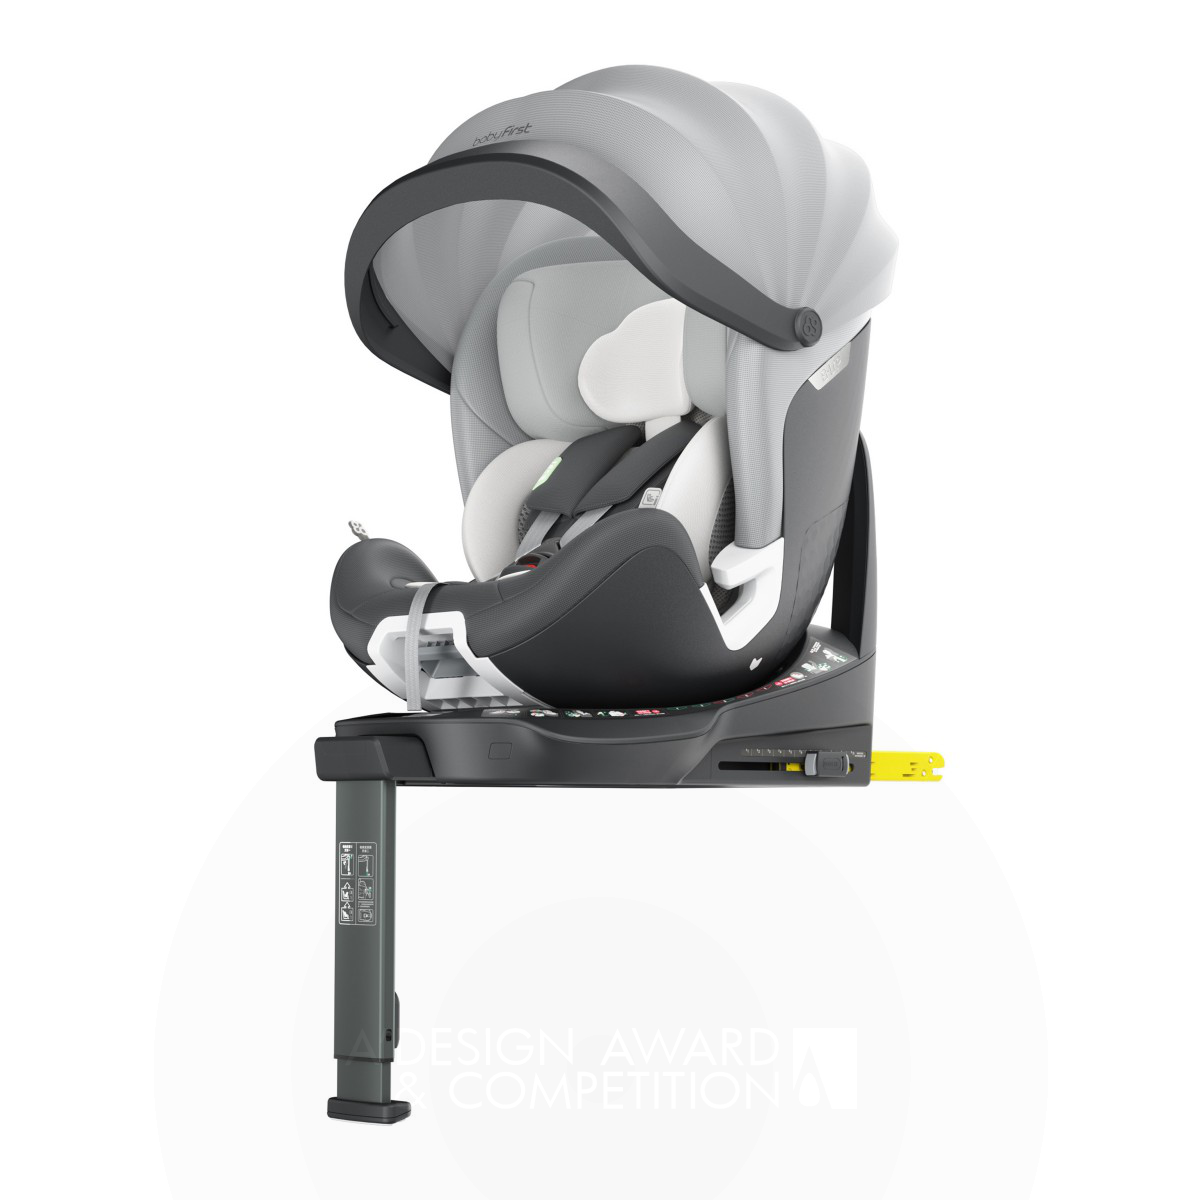 Babyfirst Joy Pro R155 Child Car Seats by Ningbo Baby First Baby Products Co., Ltd